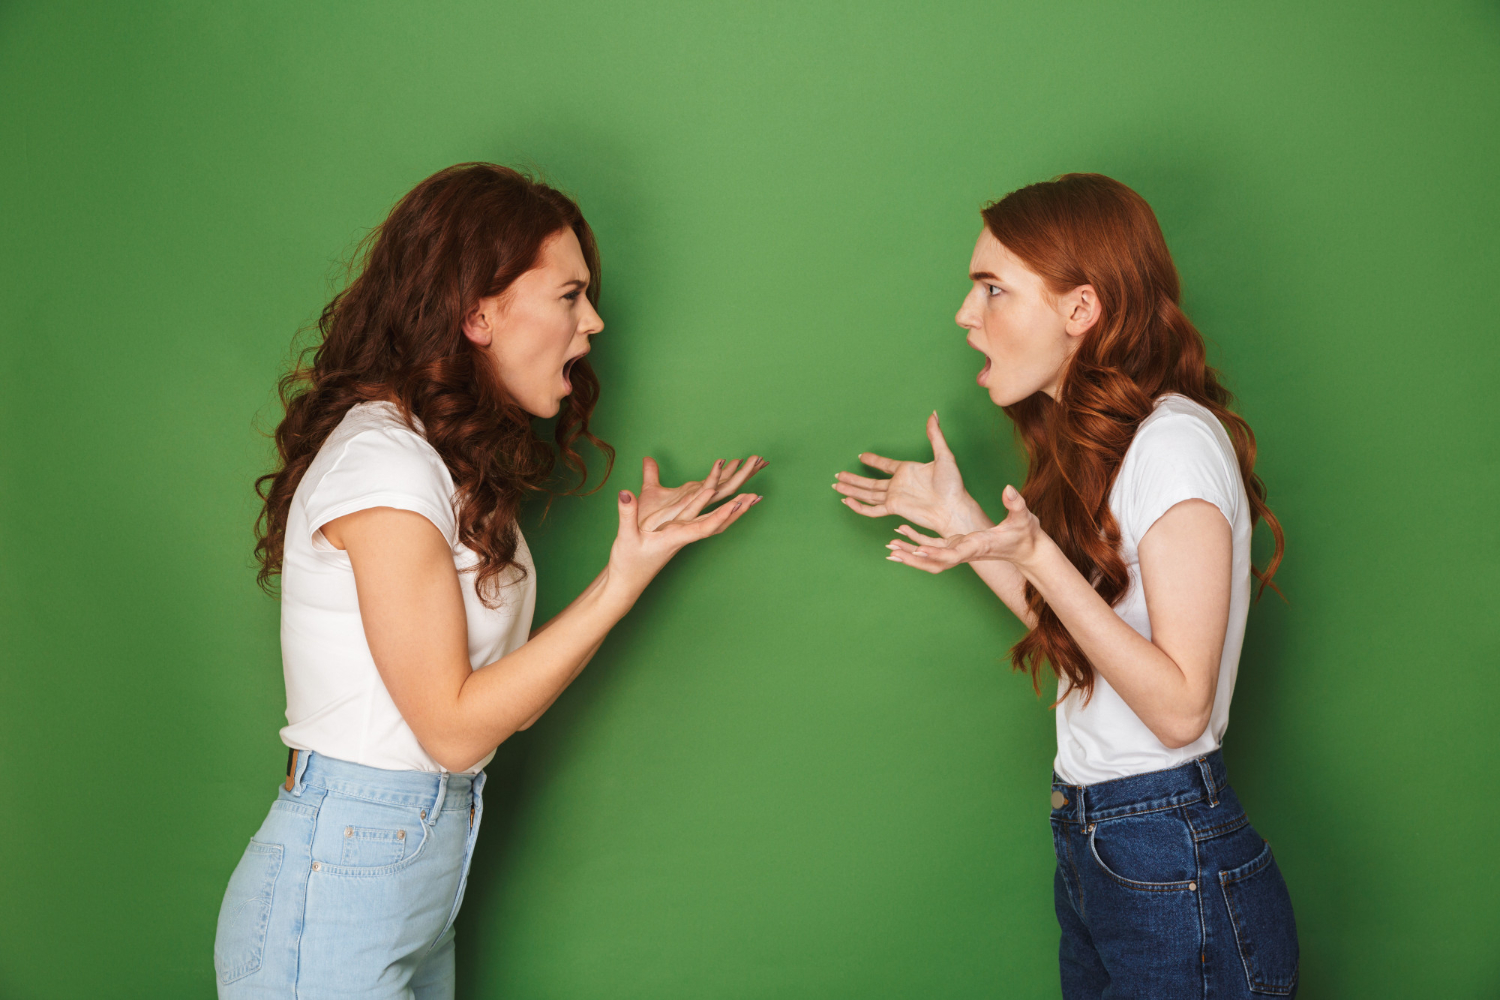 two outraged girls 20s with ginger hair standing face to face crossed shouting at each other